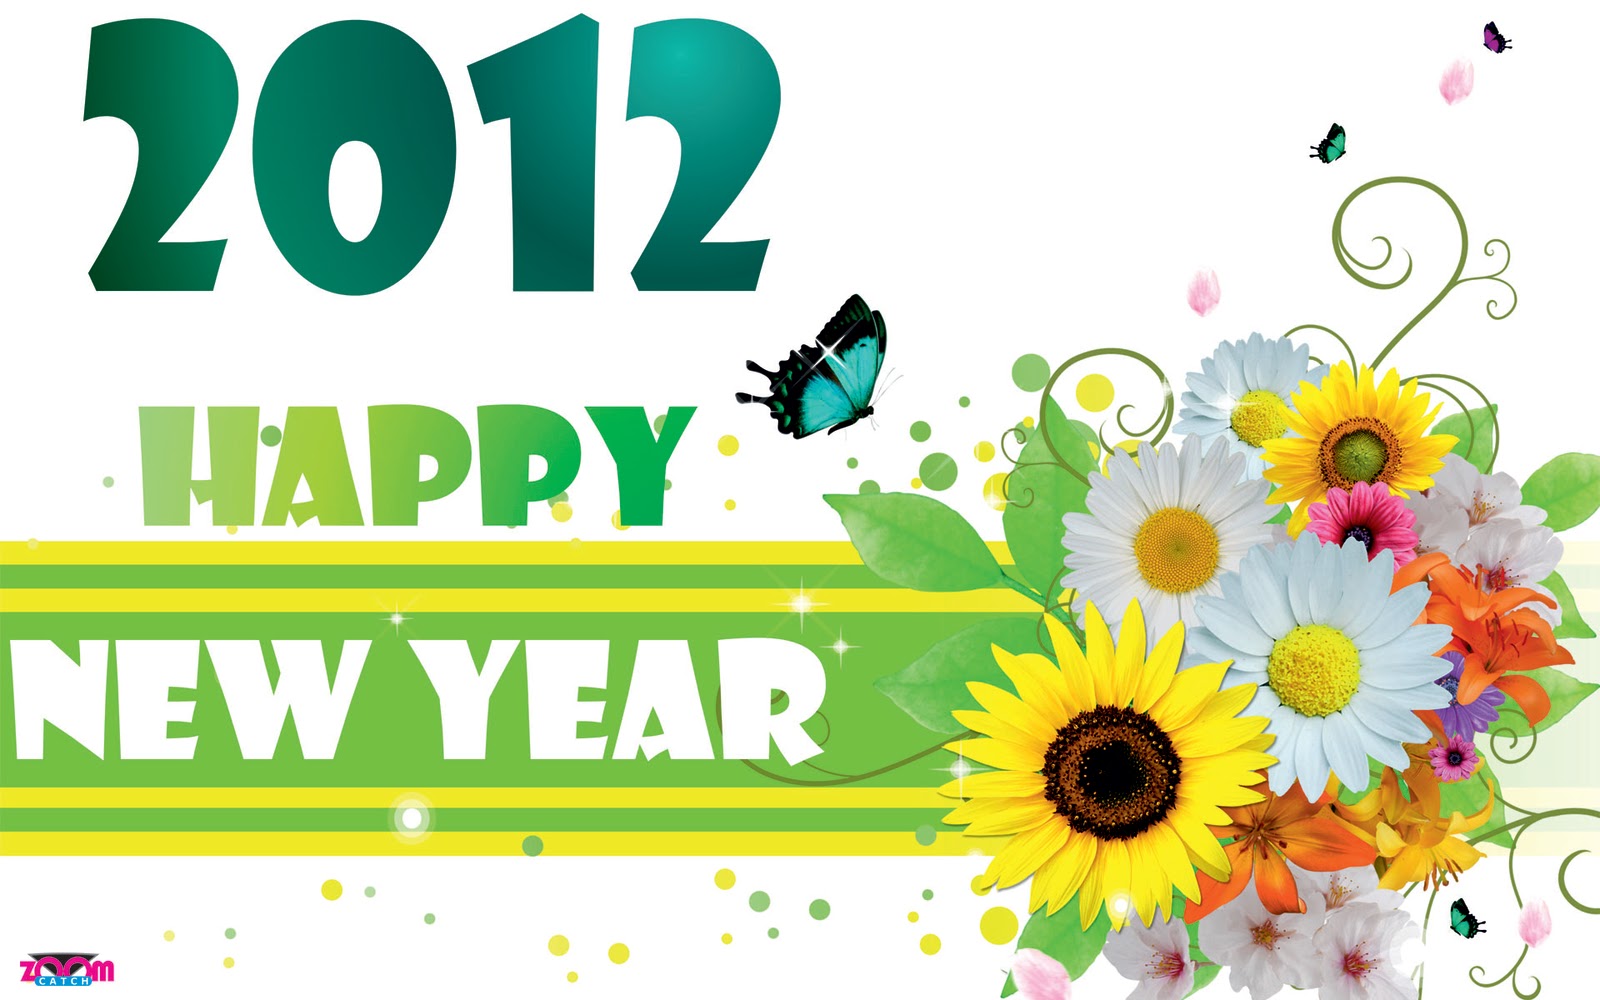 New Year 2012 High Quality Images and Wallpapers-14